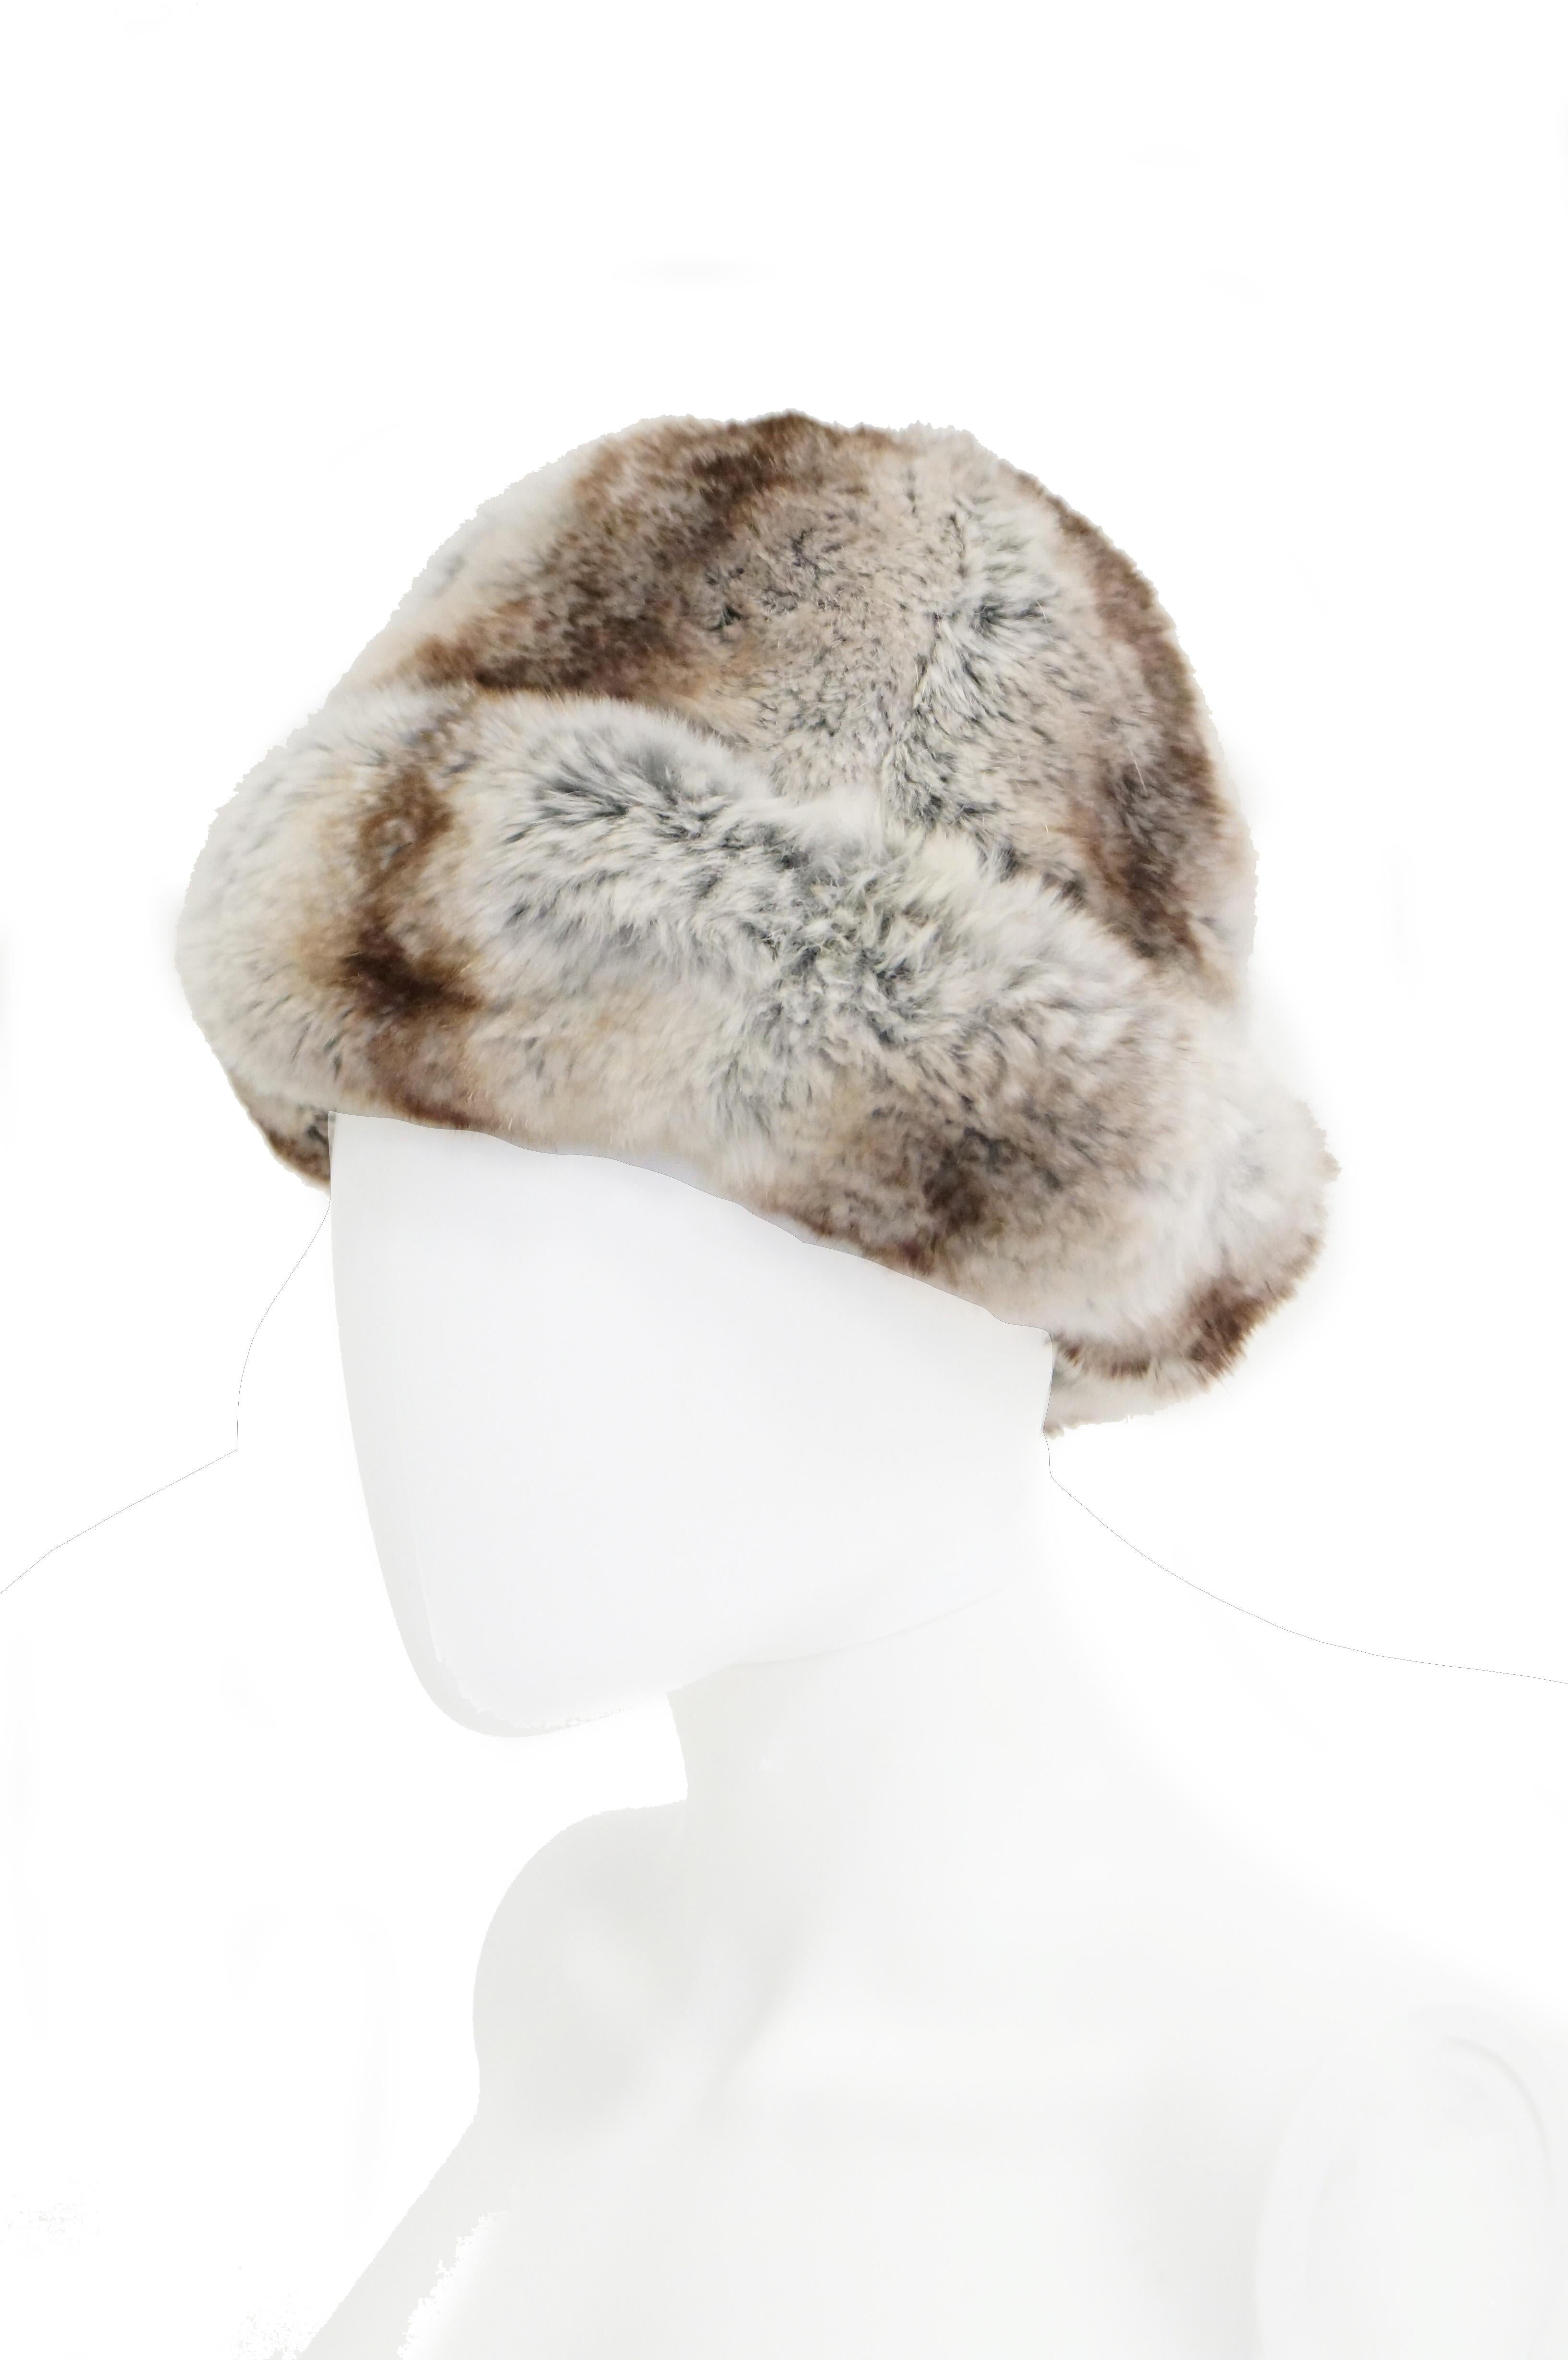 Beautiful plush grey, brown, and black hat by Christian Dior Chapeaux. This chinchilla hat has a rounded crown with gently sloping sides, and a brim that curls up at a steep angle! The brim can be pulled down slightly to expose a thick marled grey